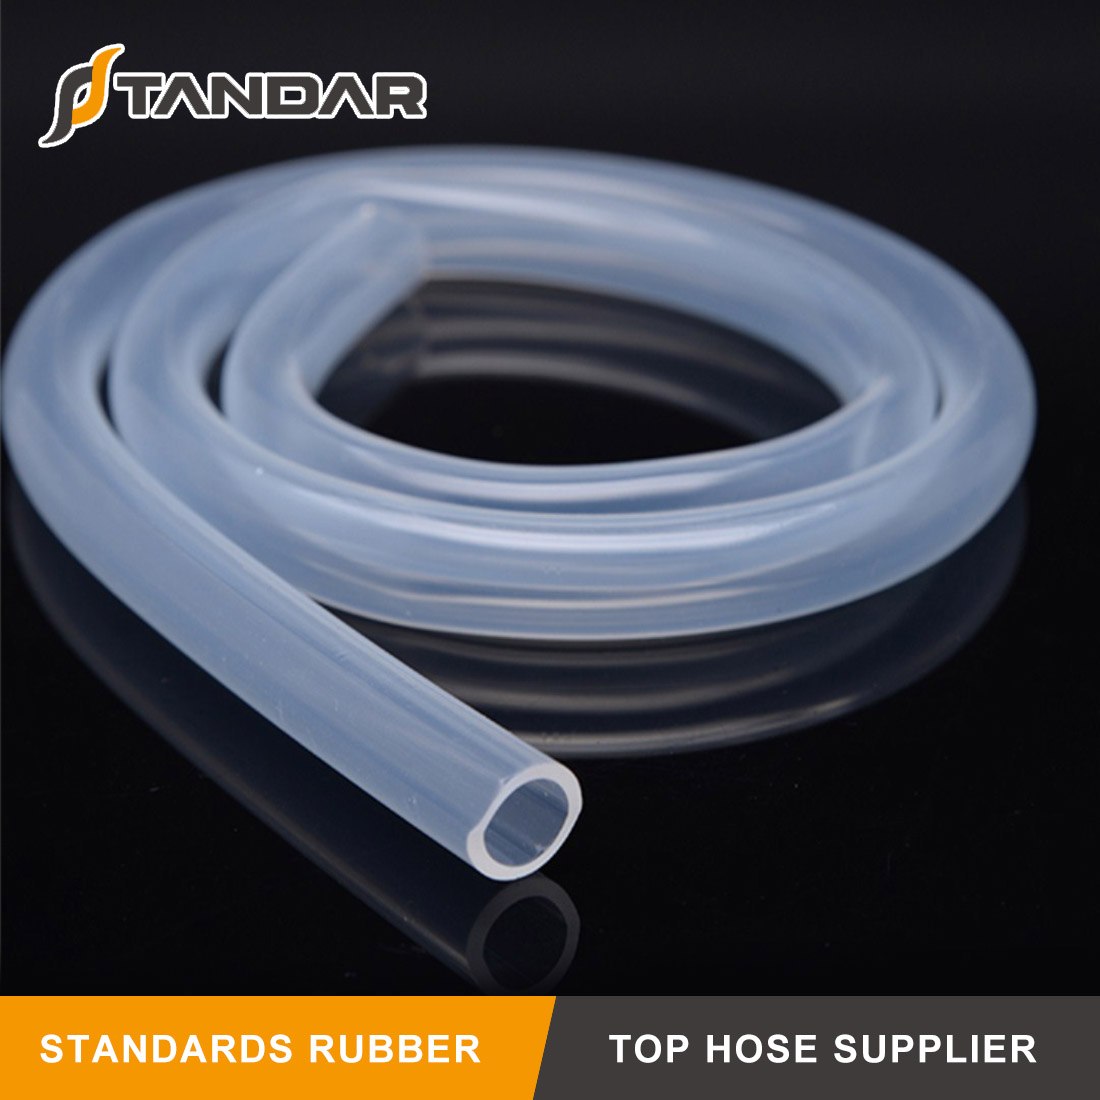 Low Pressure thin wall soft clear platinum cured Medical Grade Silicone tubing